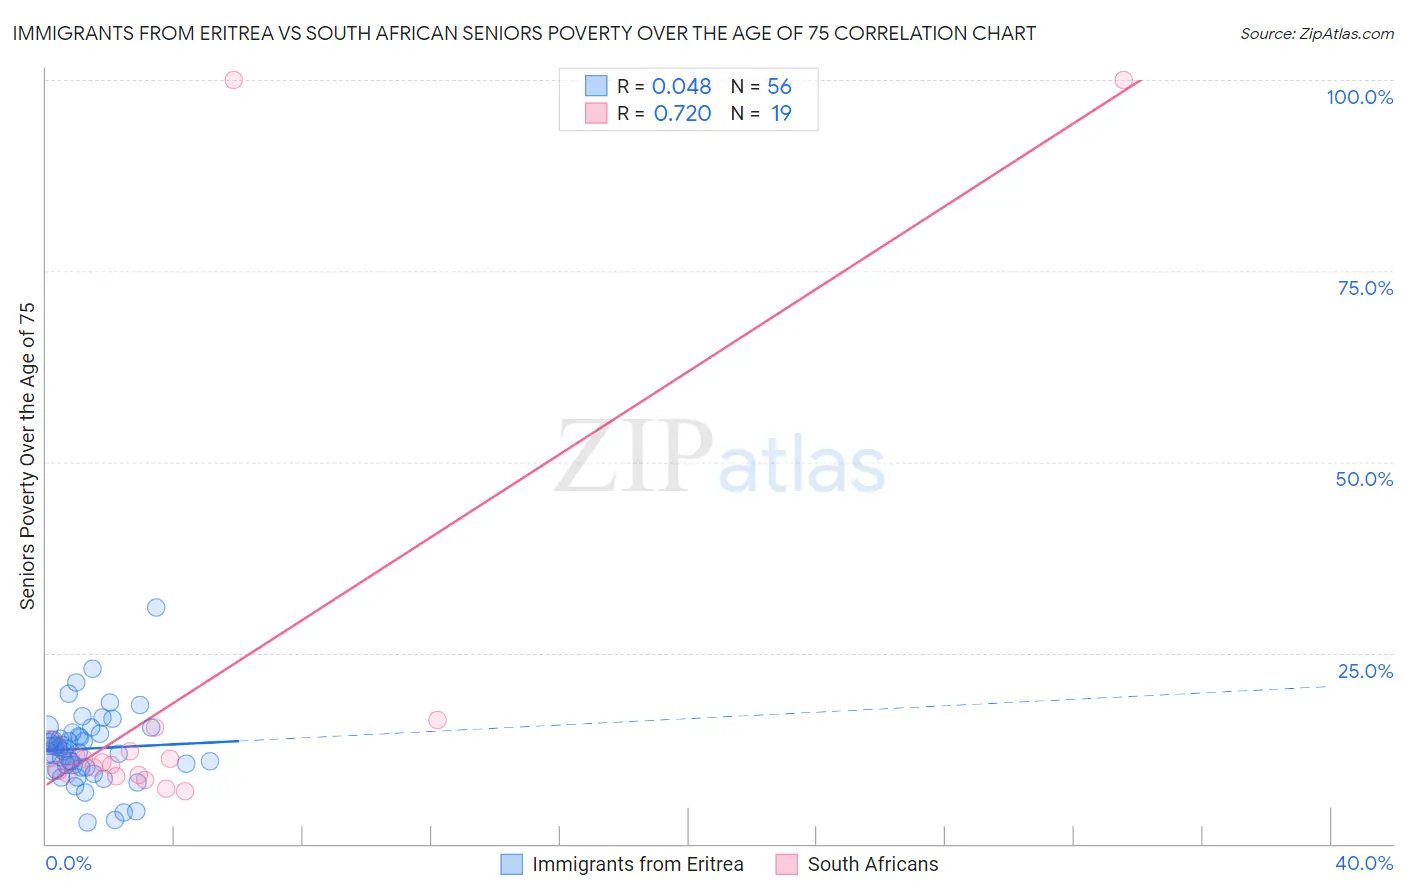 Immigrants from Eritrea vs South African Seniors Poverty Over the Age of 75